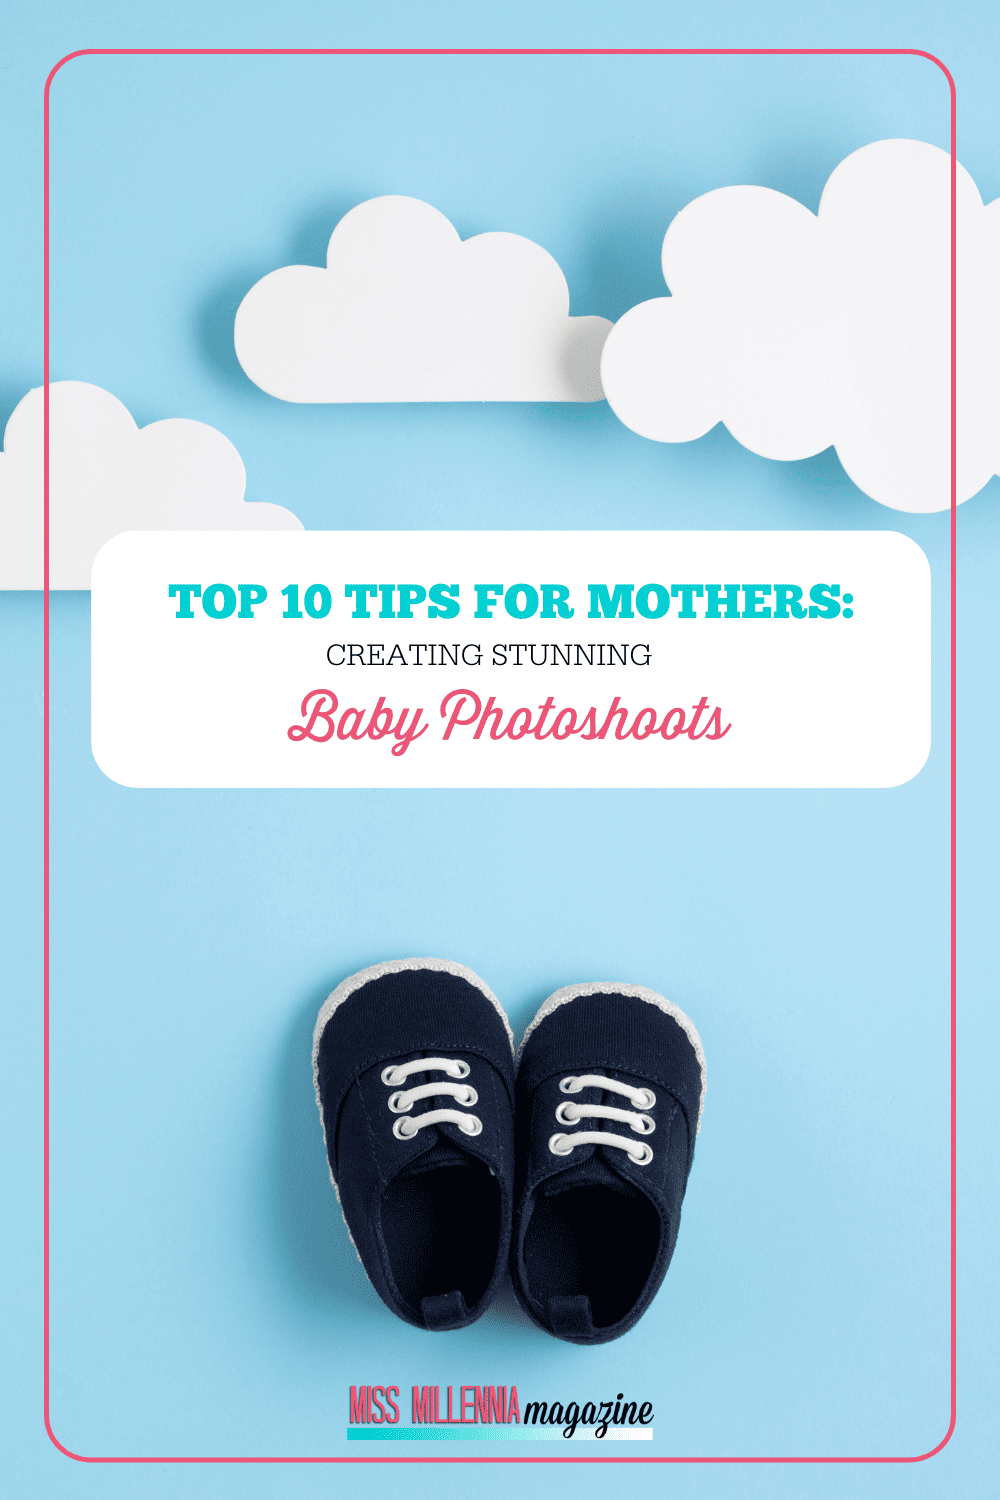 Top 10 Tips for Mothers: Creating Stunning Baby Photoshoots